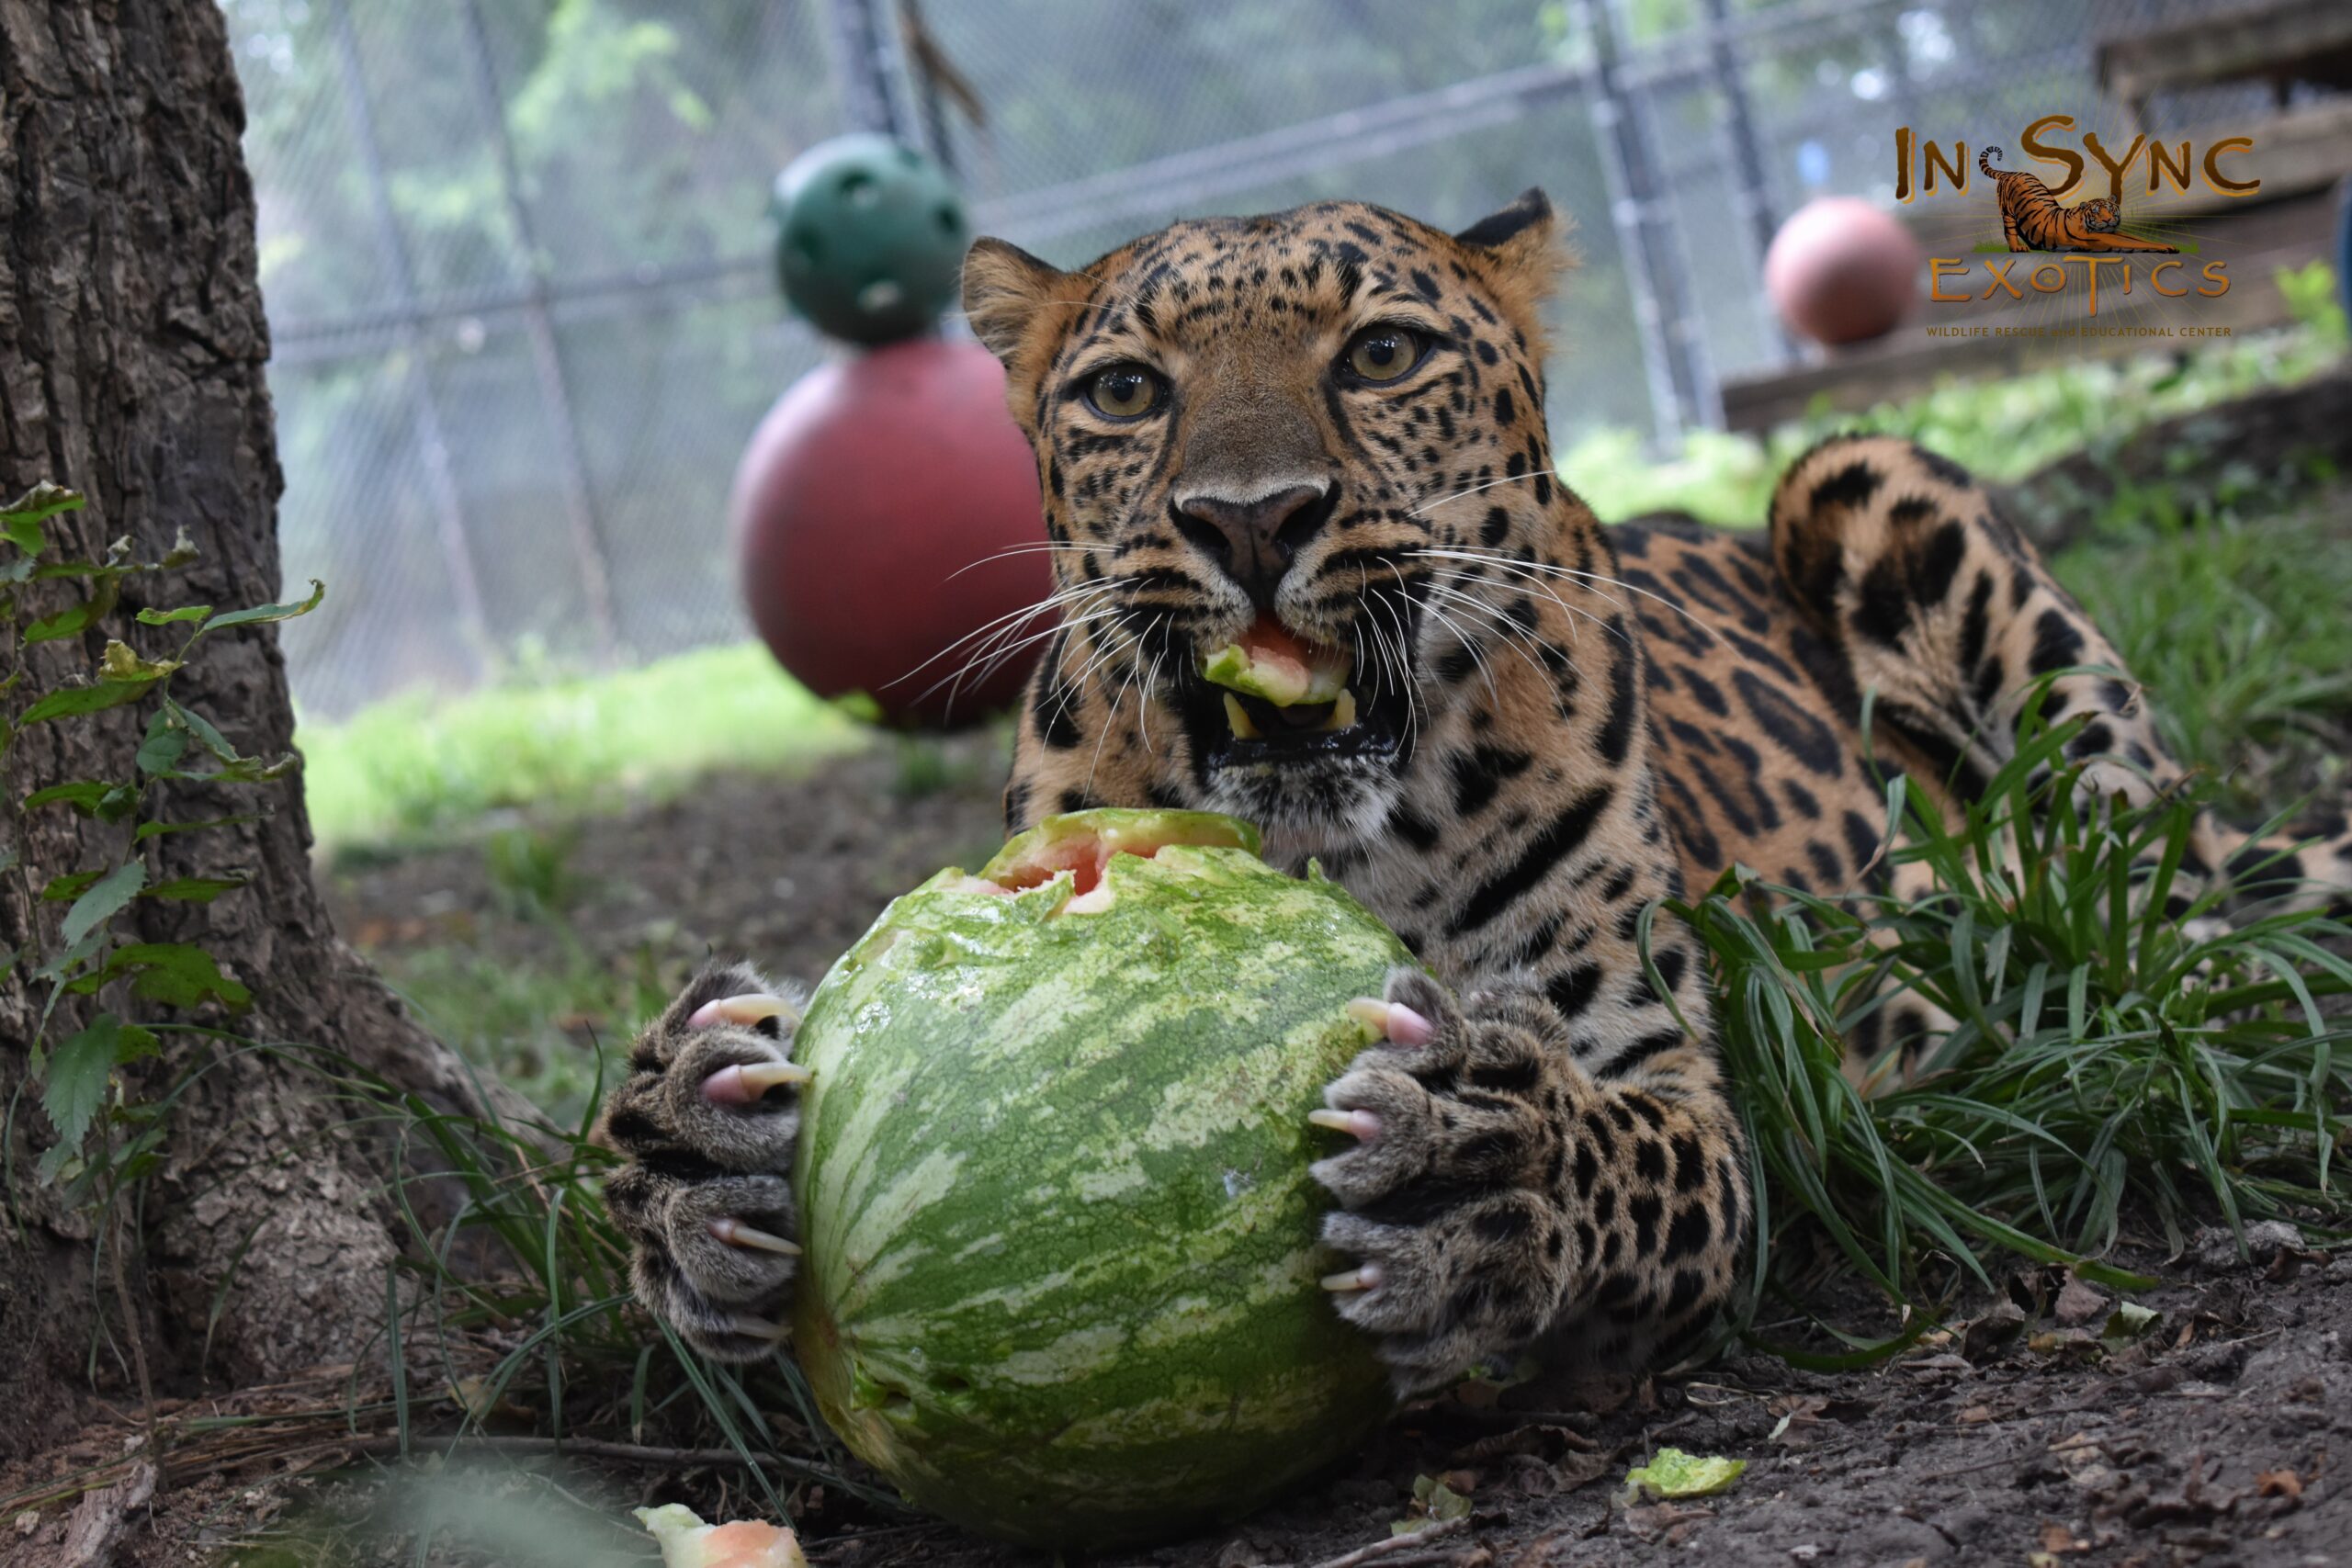 Lily the Leopard getting her Watermelon at the Watermelon Toss